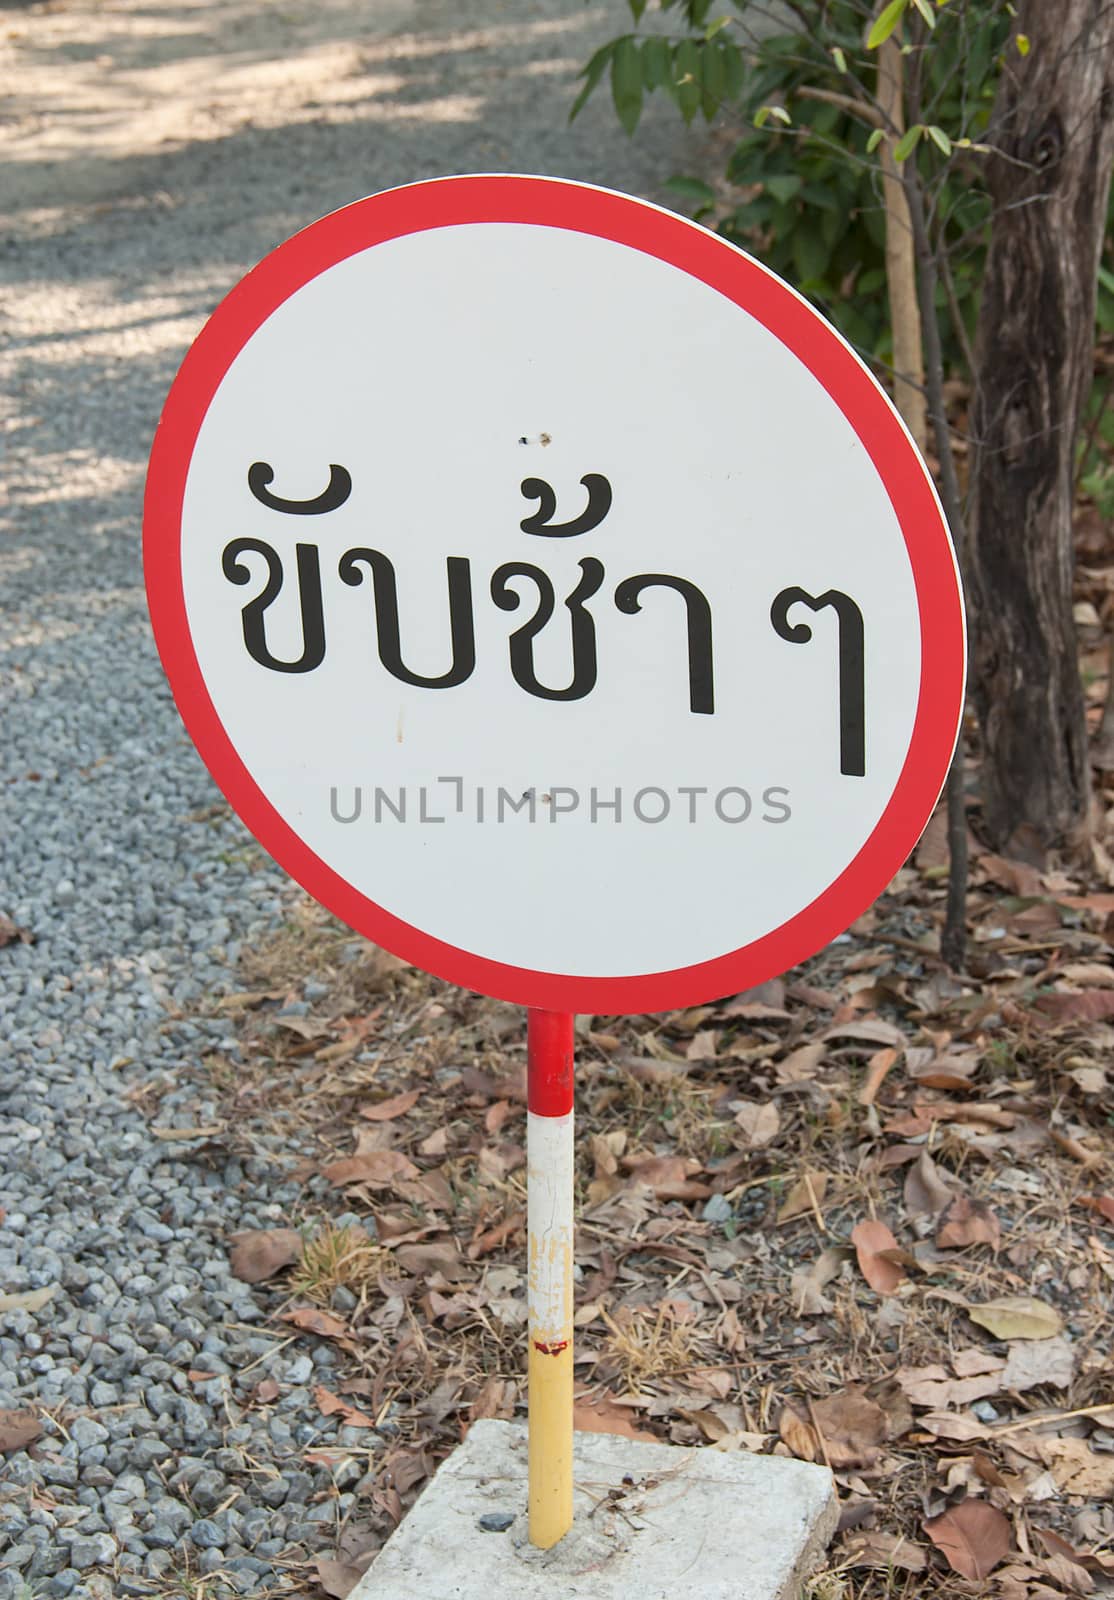 Warning signs to drive slowly located near the garden.